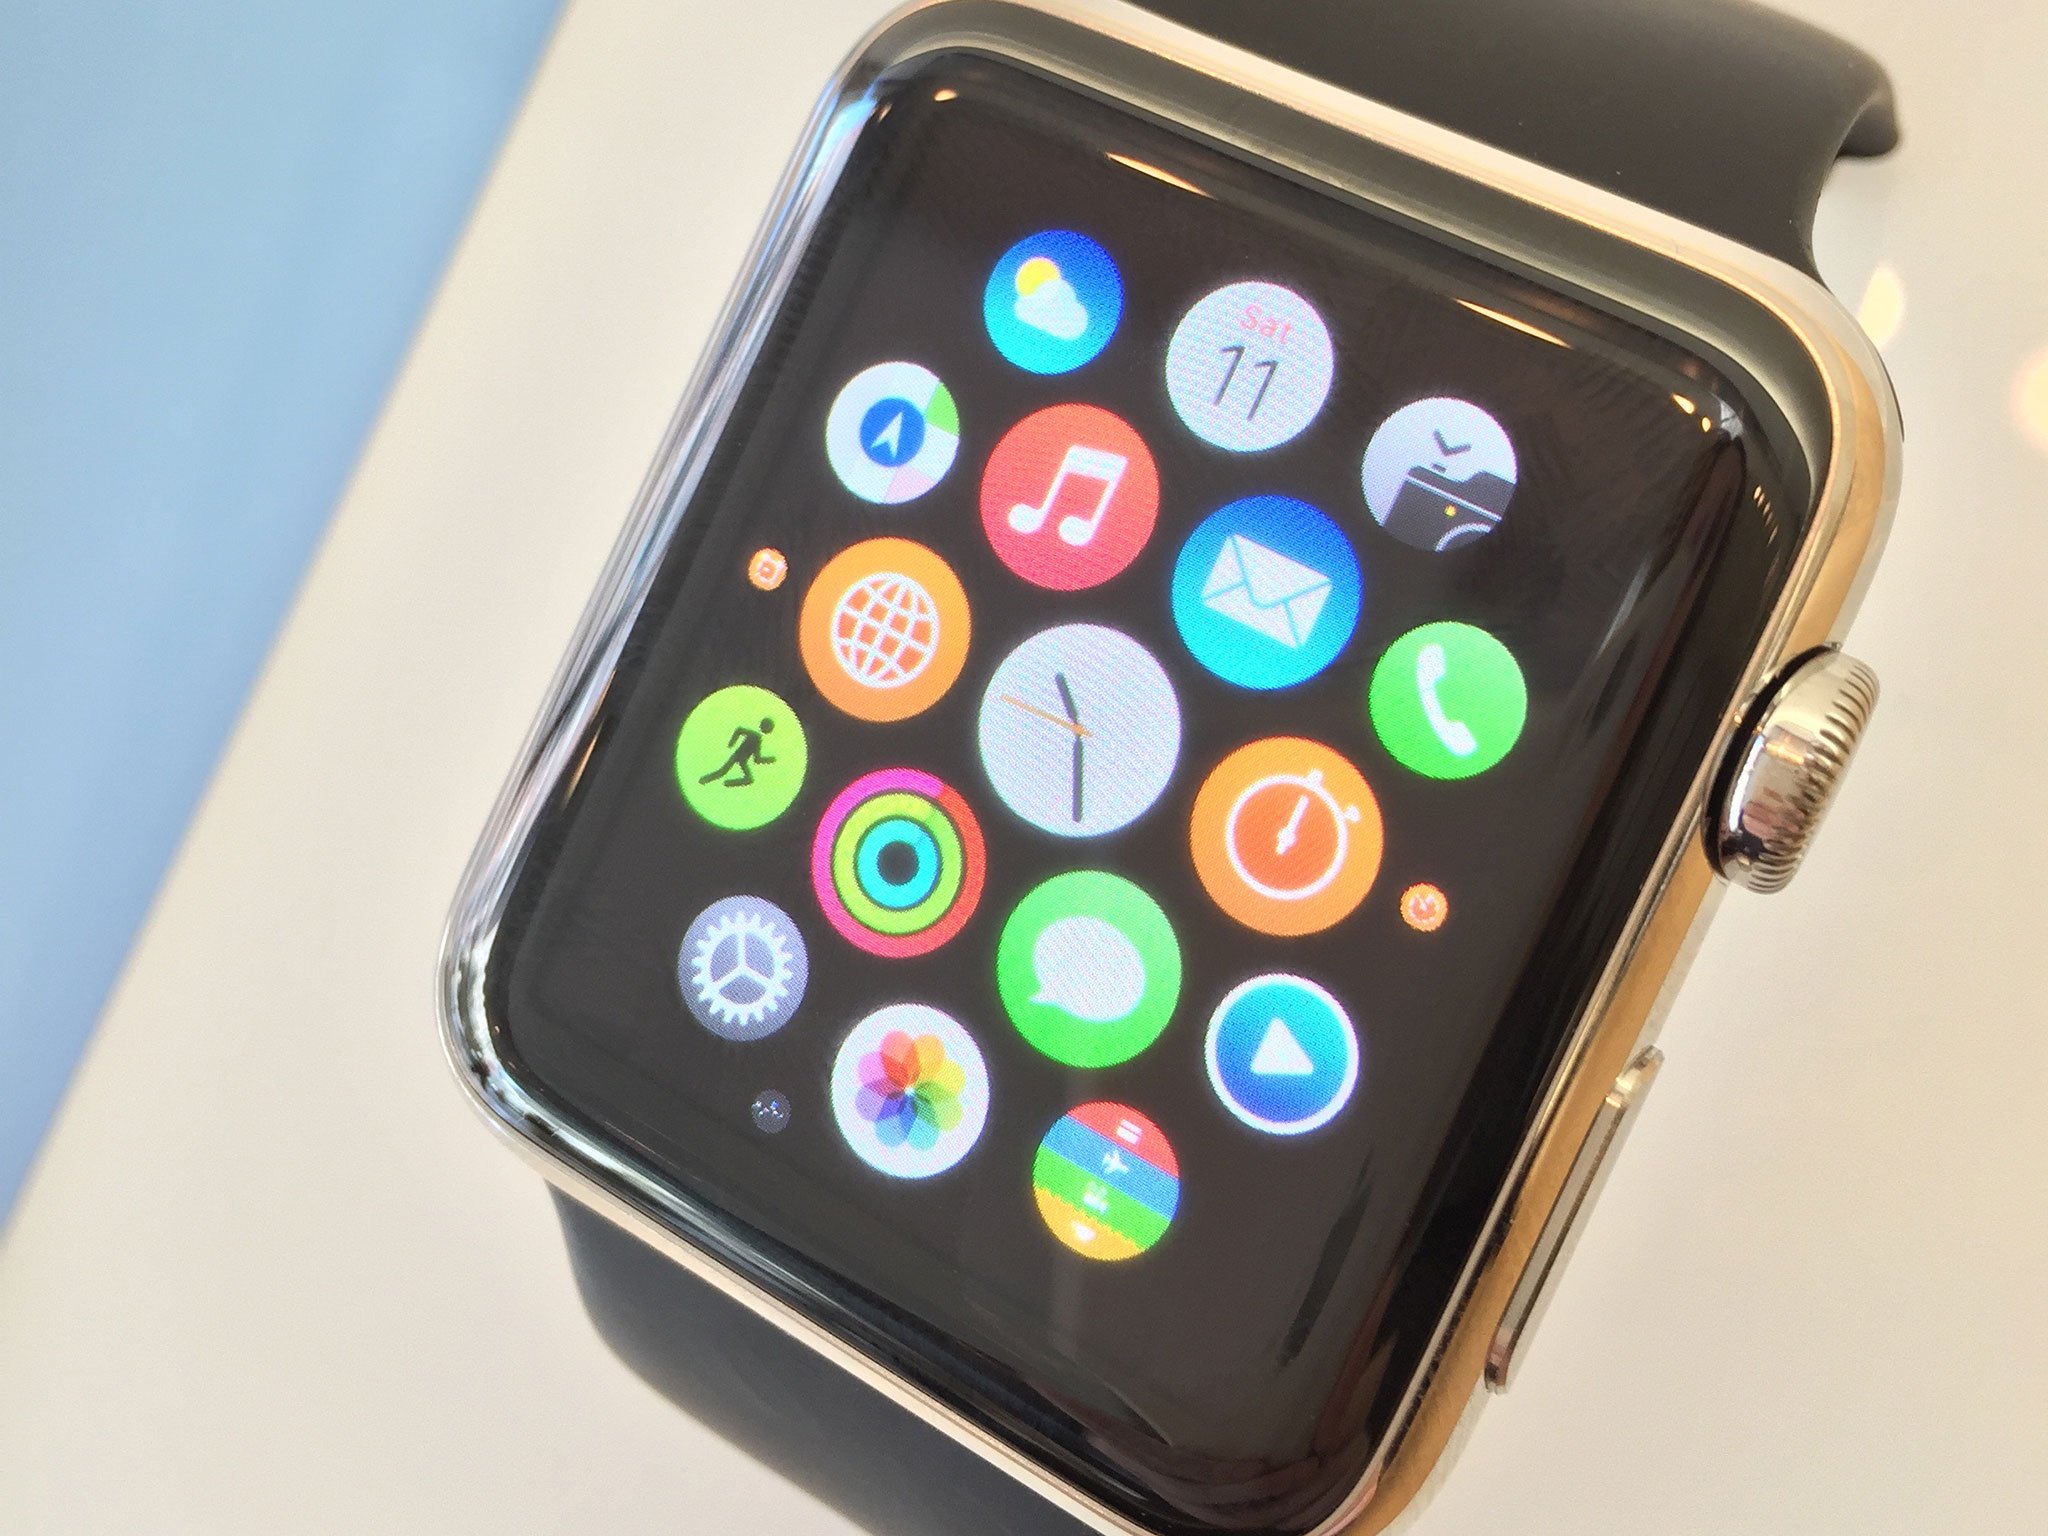 How to ready your iPhone for Apple Watch